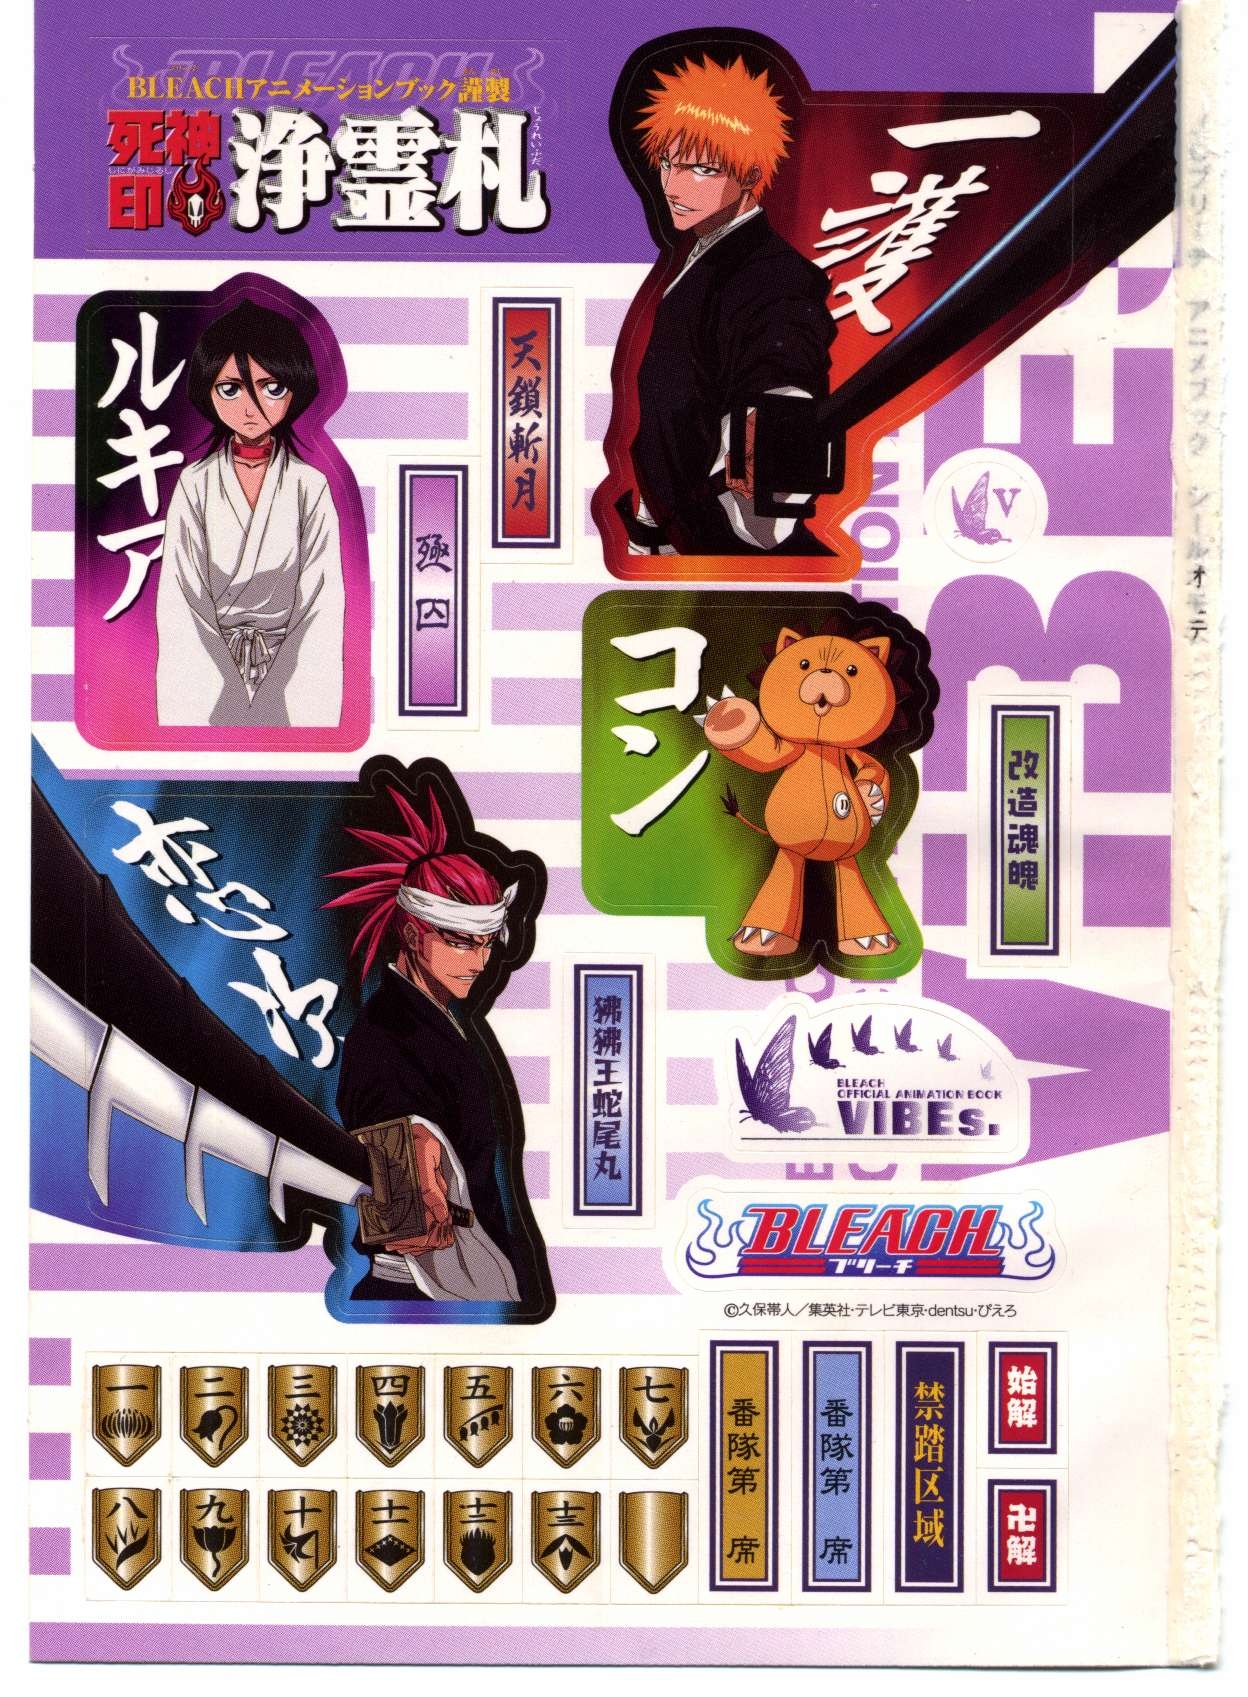 Bleach: Official Animation Book VIBEs 263